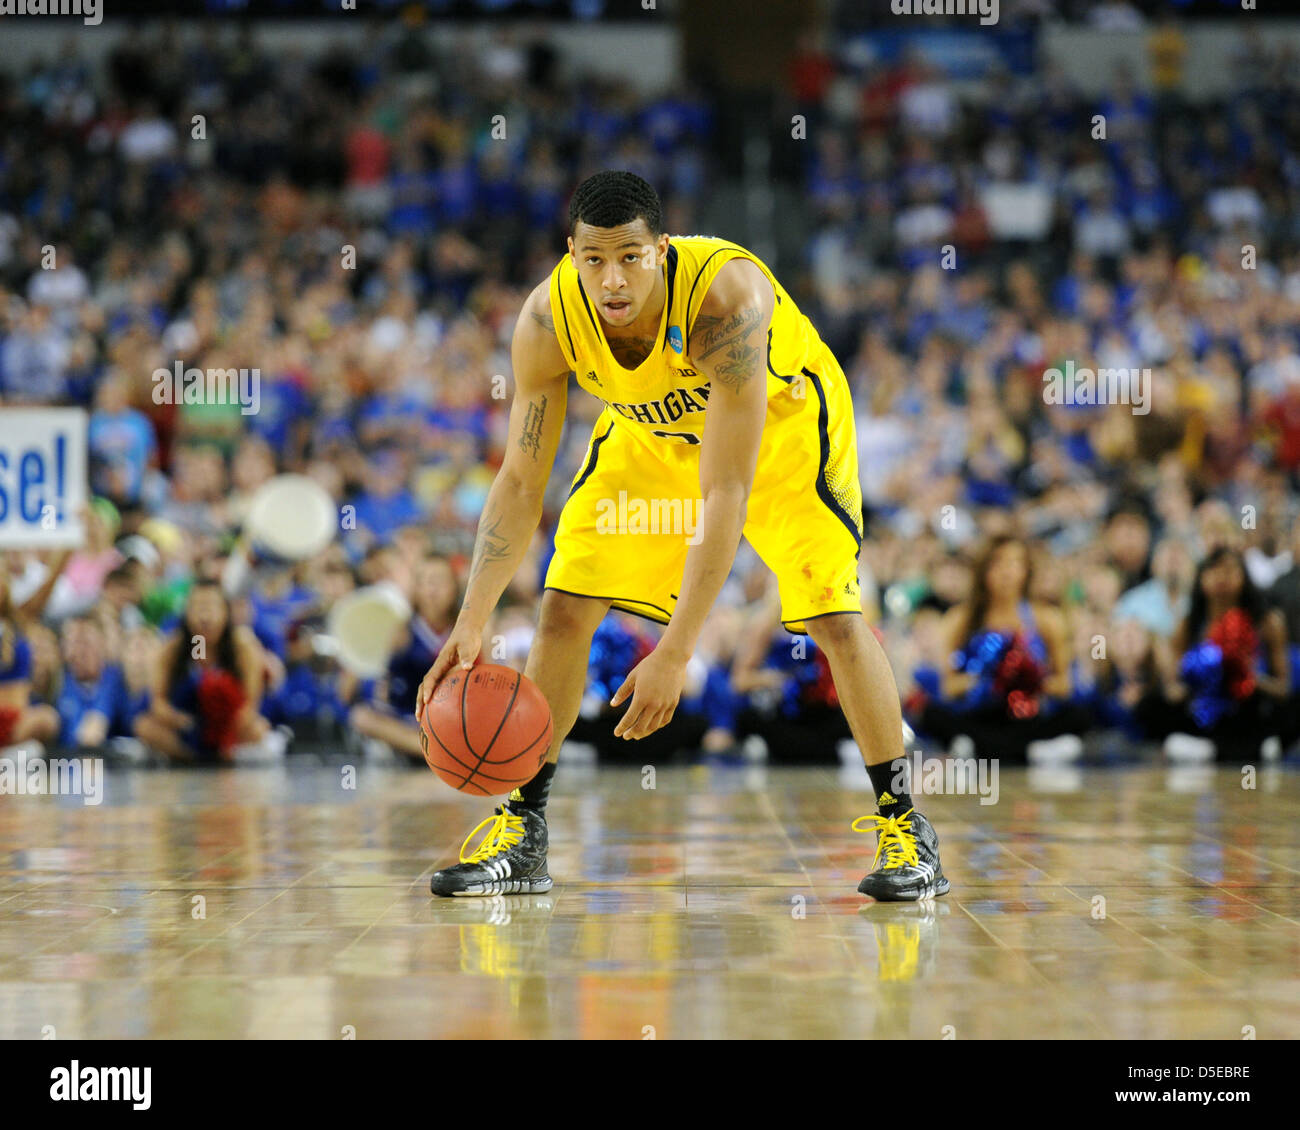 March 29, 2013: Michigan Wolverines guard Trey Burke #3 scored 23 points during the NCAA Tournament South region game between the University of Michigan Wolverines and the University of Kansas Jayhawks at Cowboys Stadium in Arlington, TX Michigan defeated Kansas 87-85 Stock Photo